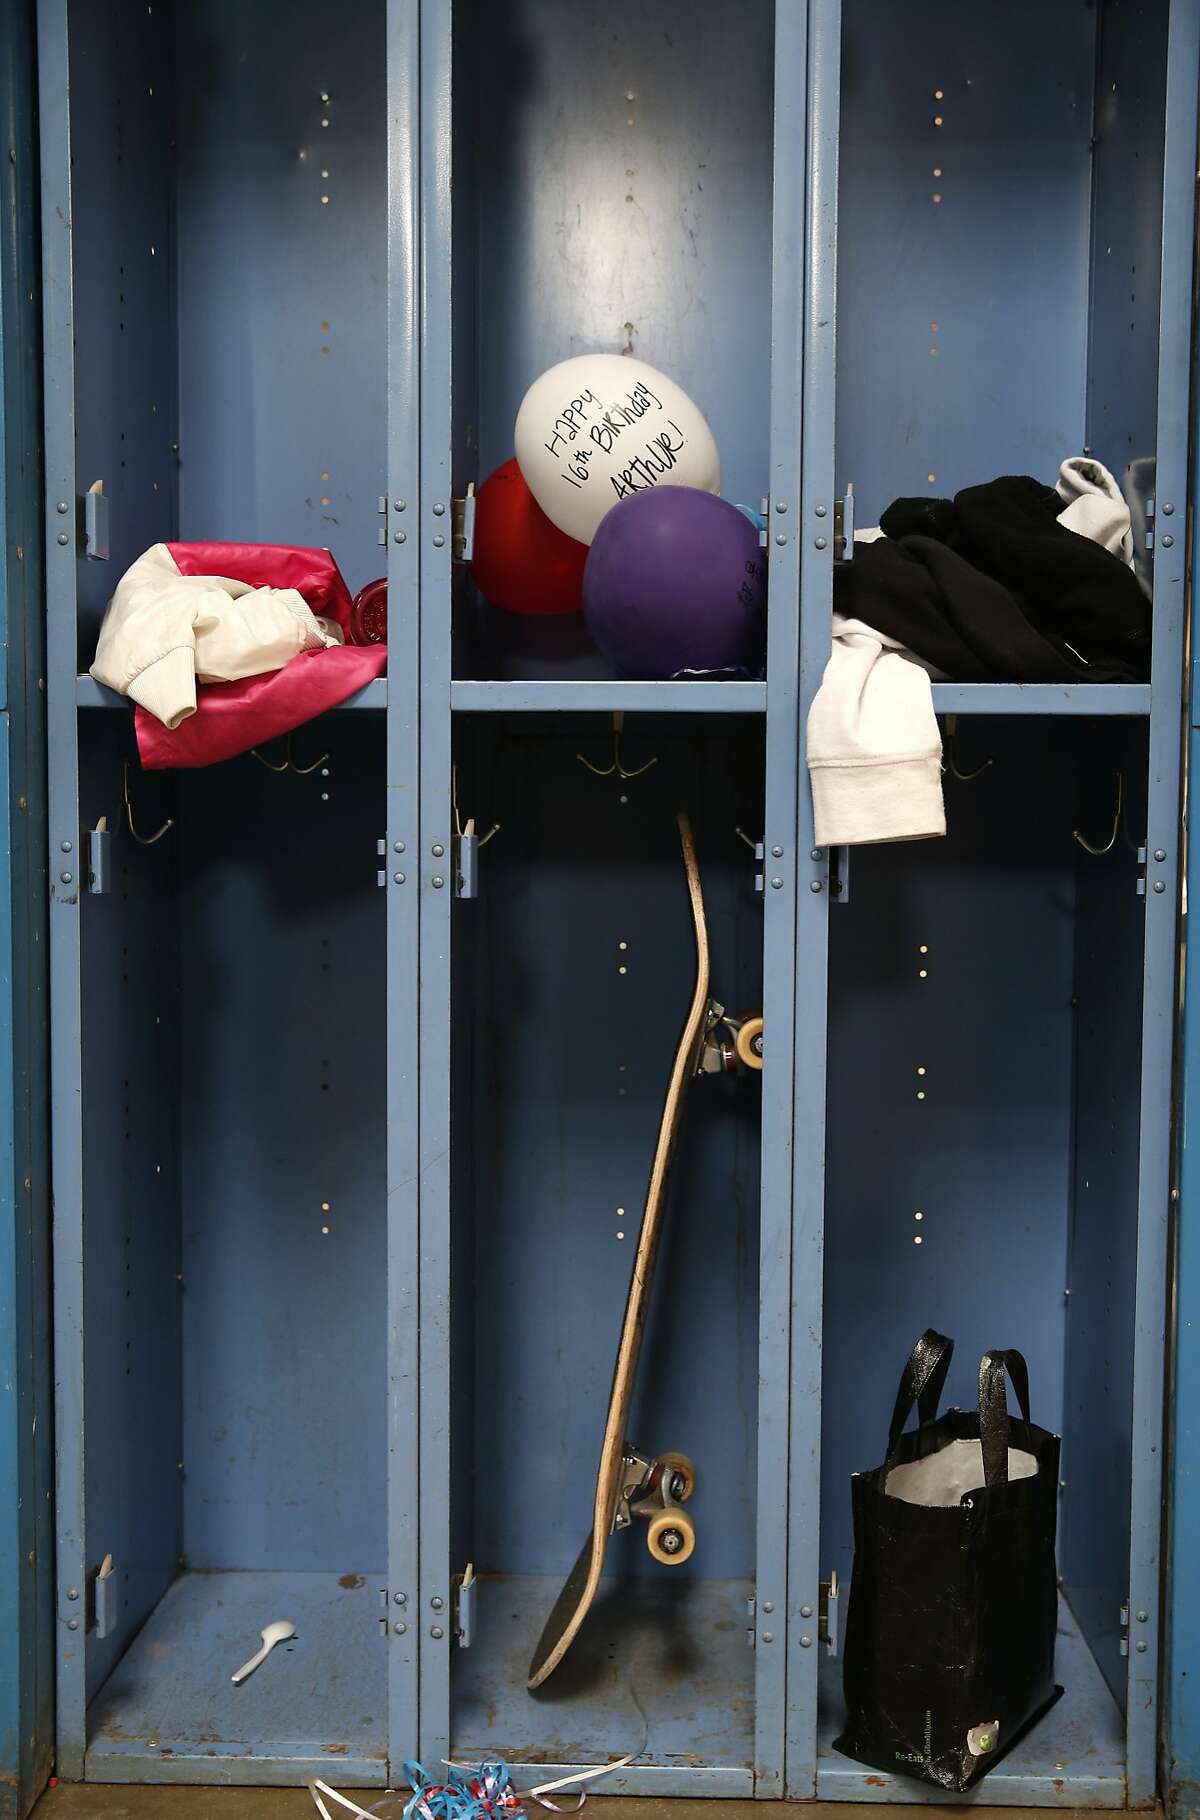 Student's lockers do not need doors at the Design Tech High School in Burlingame, Calif. on Thursday, Feb. 25, 2016. The charter school has plans to relocate its school to the Oracle campus in the near future.